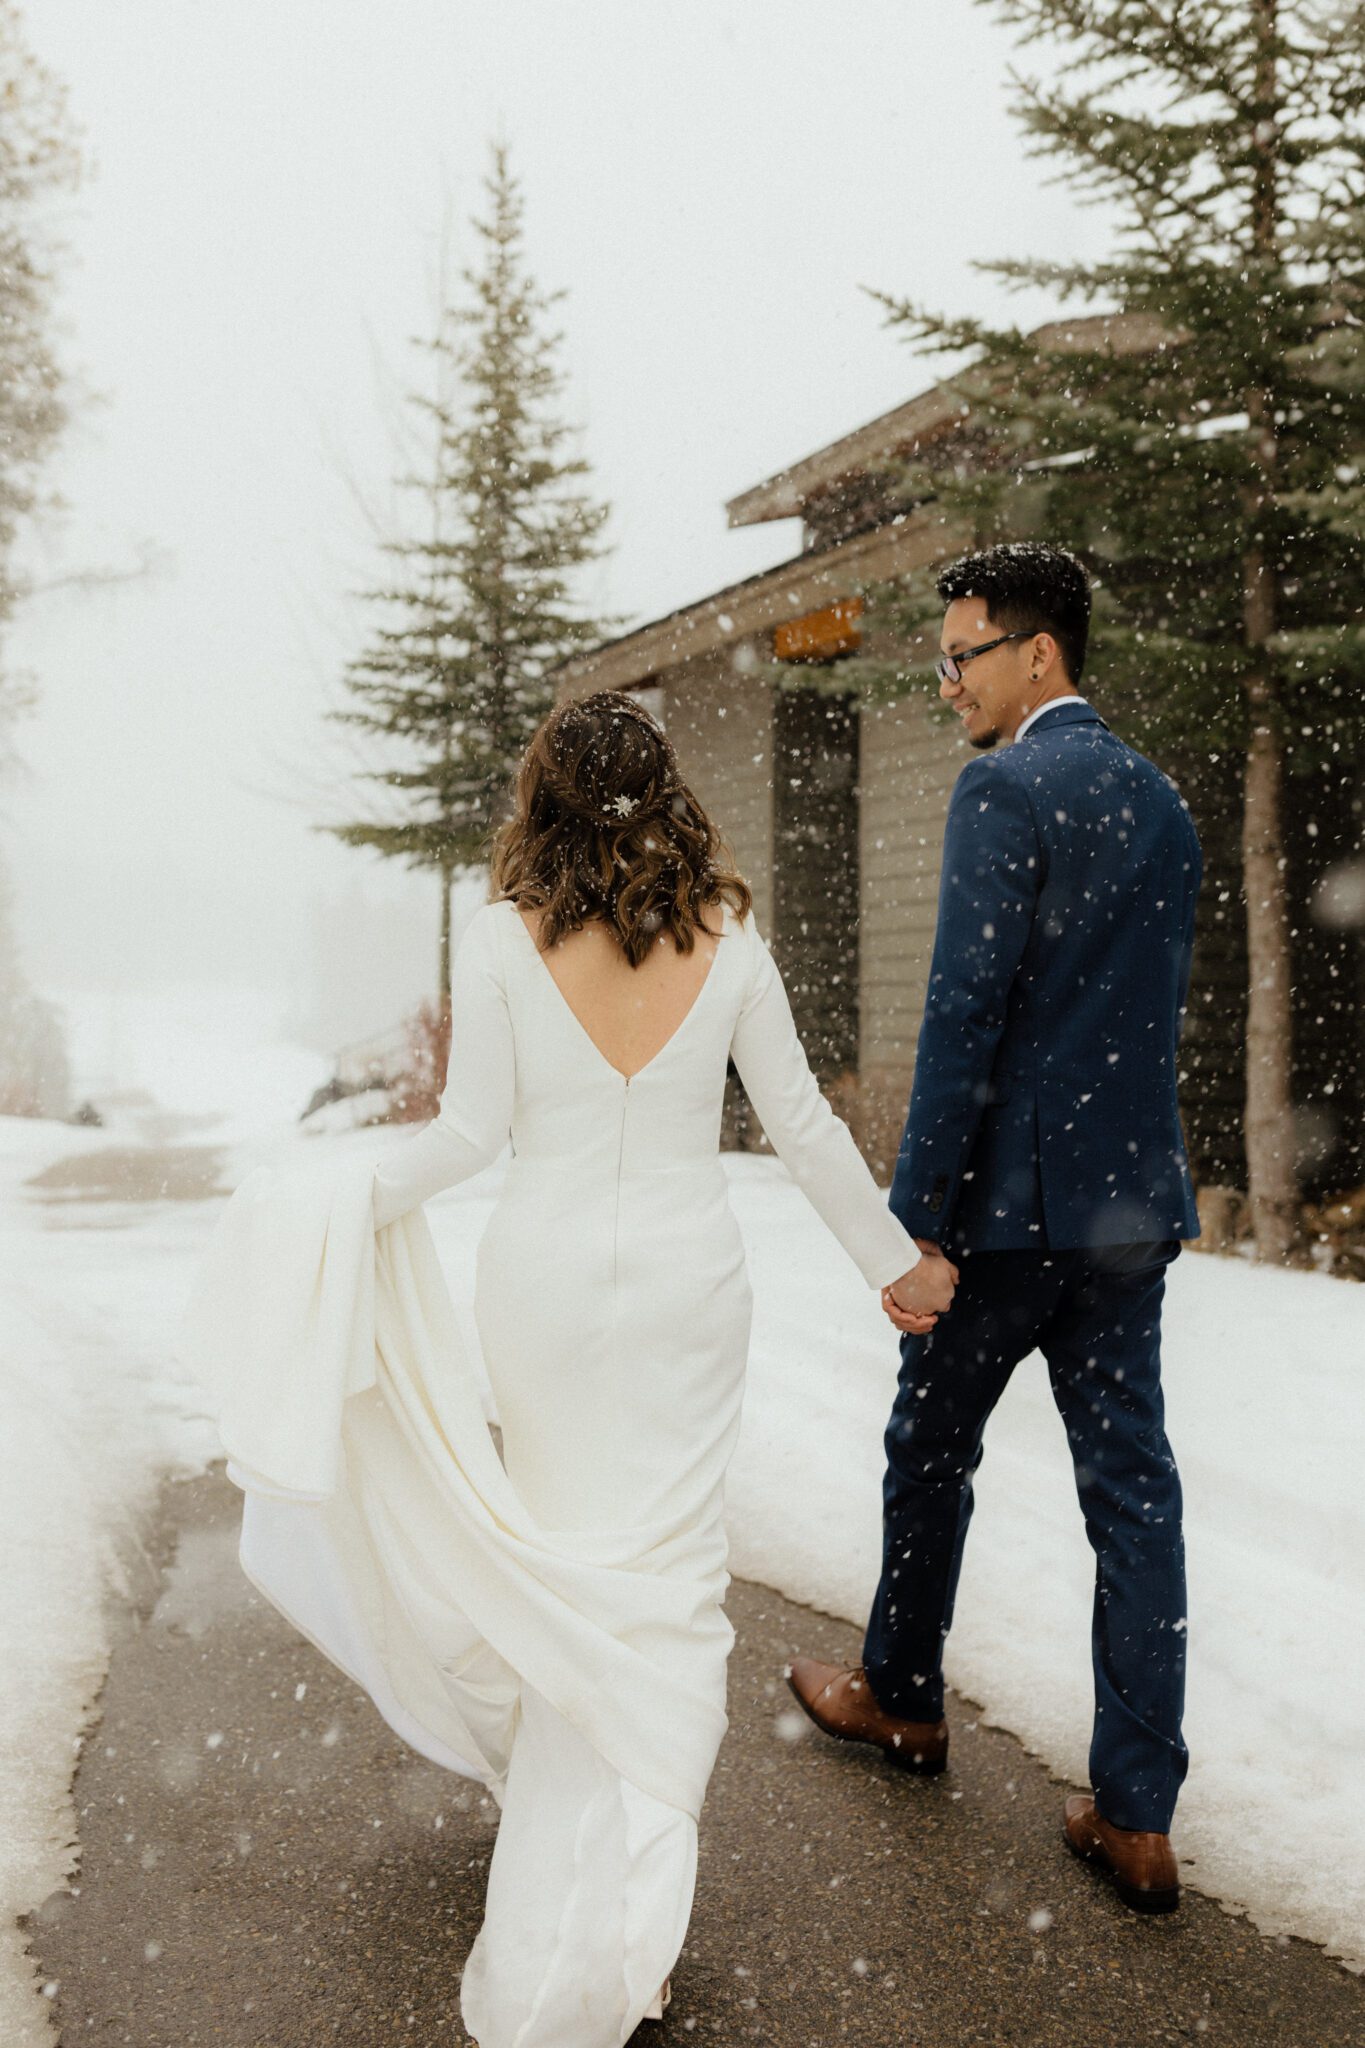 Snow is falling at the Silvertip Resort as the newly married couple walks along a snow-covered path, bride is wearing elegant gown, winter wedding inspiration. 